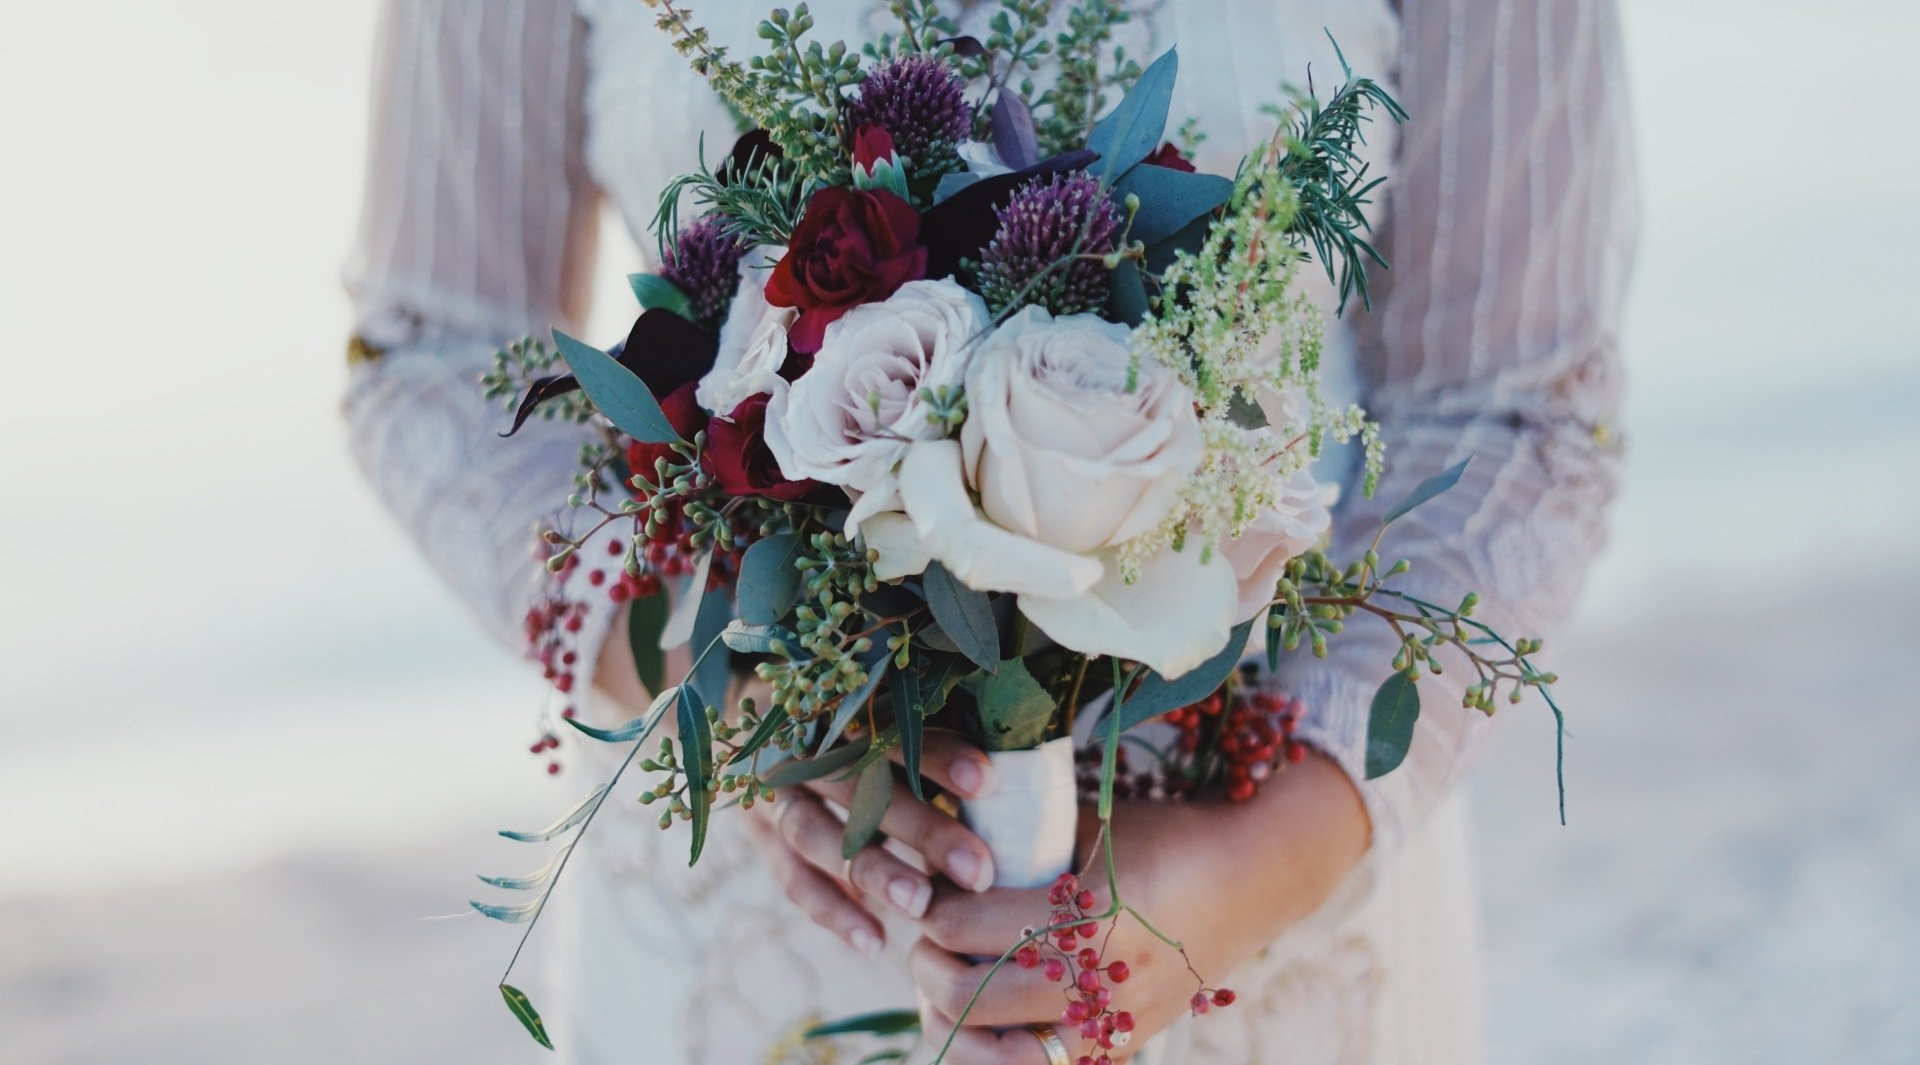 A bride holding a bridal bouquet made of white roses, red roses, and thistle